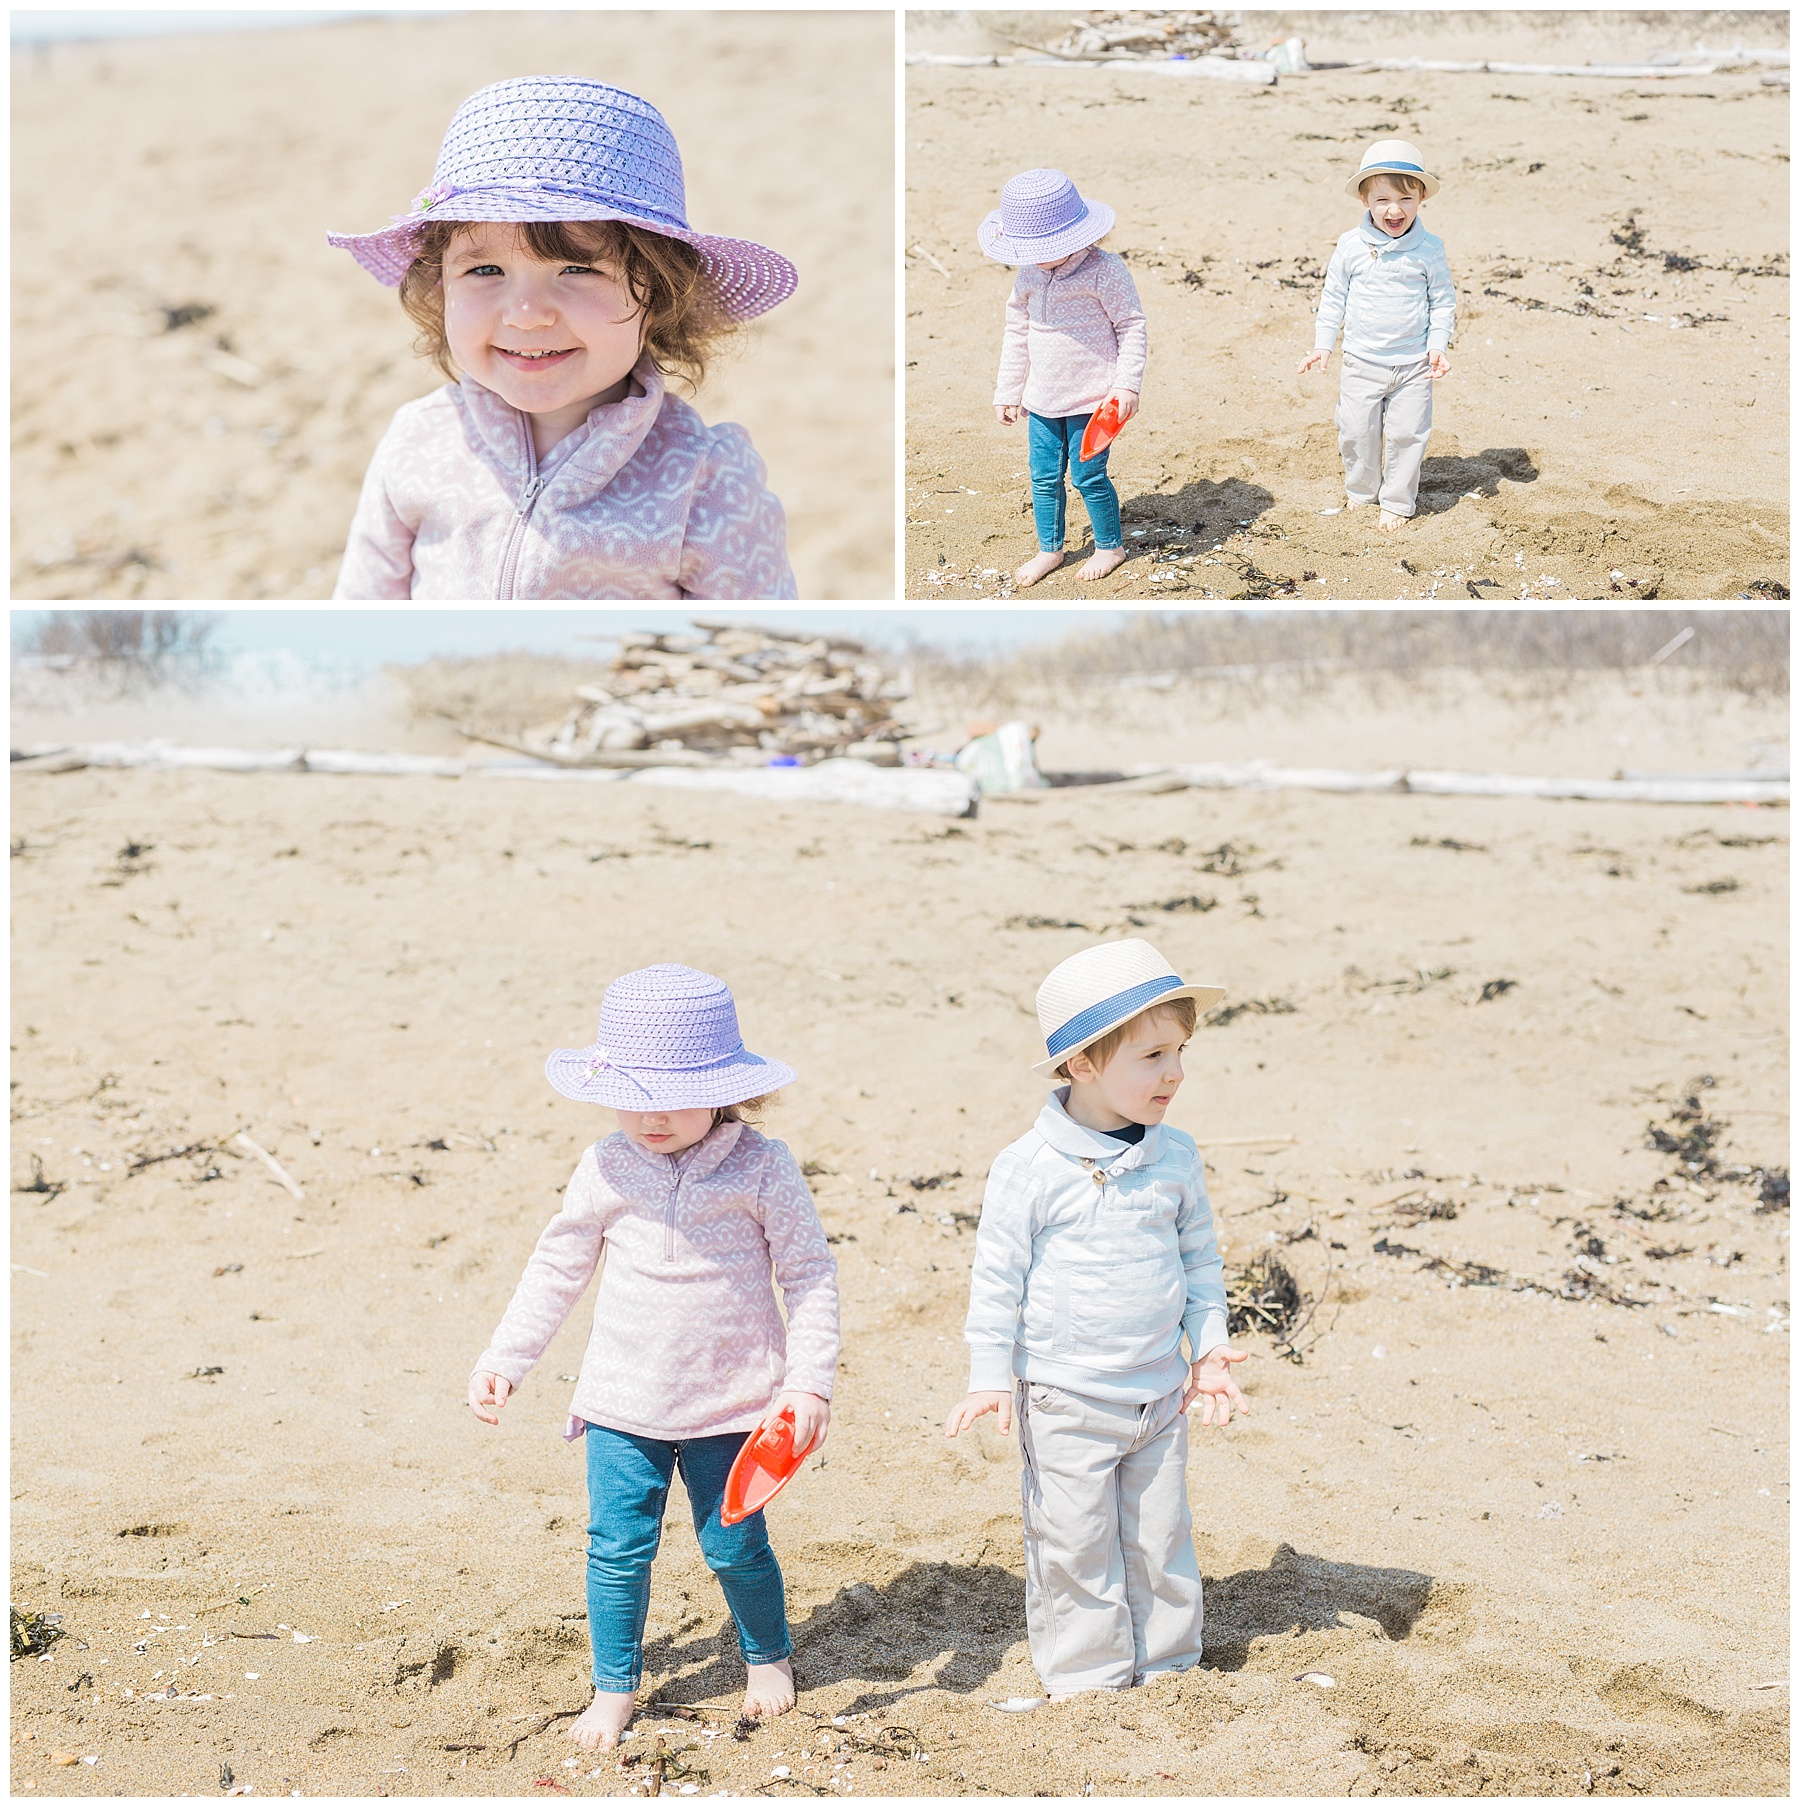 fashionable boy and girl toddler portrait session at the beach at reid state park in georgetown, maine, children's portrait photographer